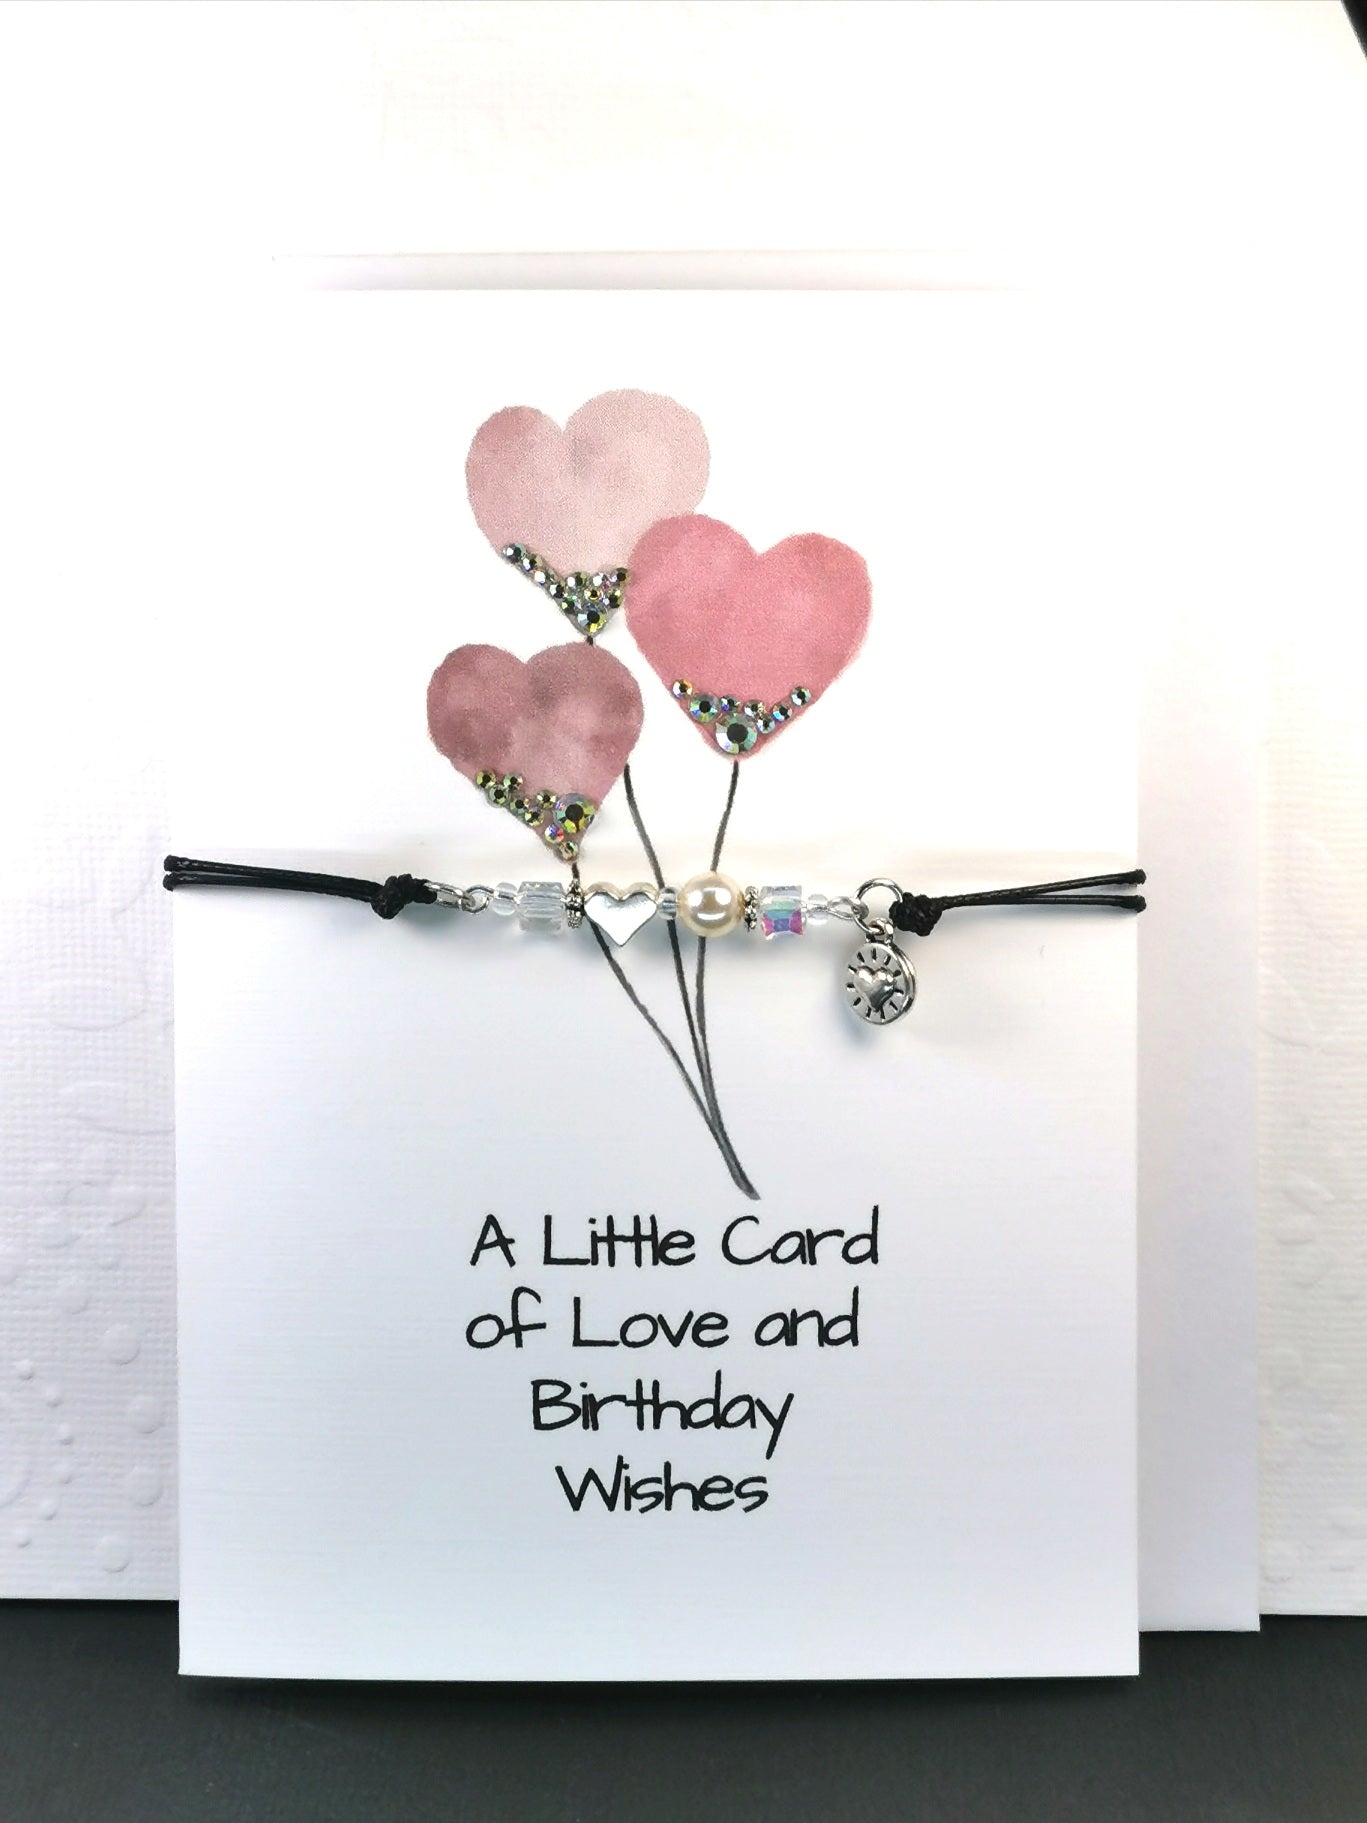 Heart Balloon Birthday Wishes  Bracelet Gift Card. A Little Card of Love and Birthday Wishes